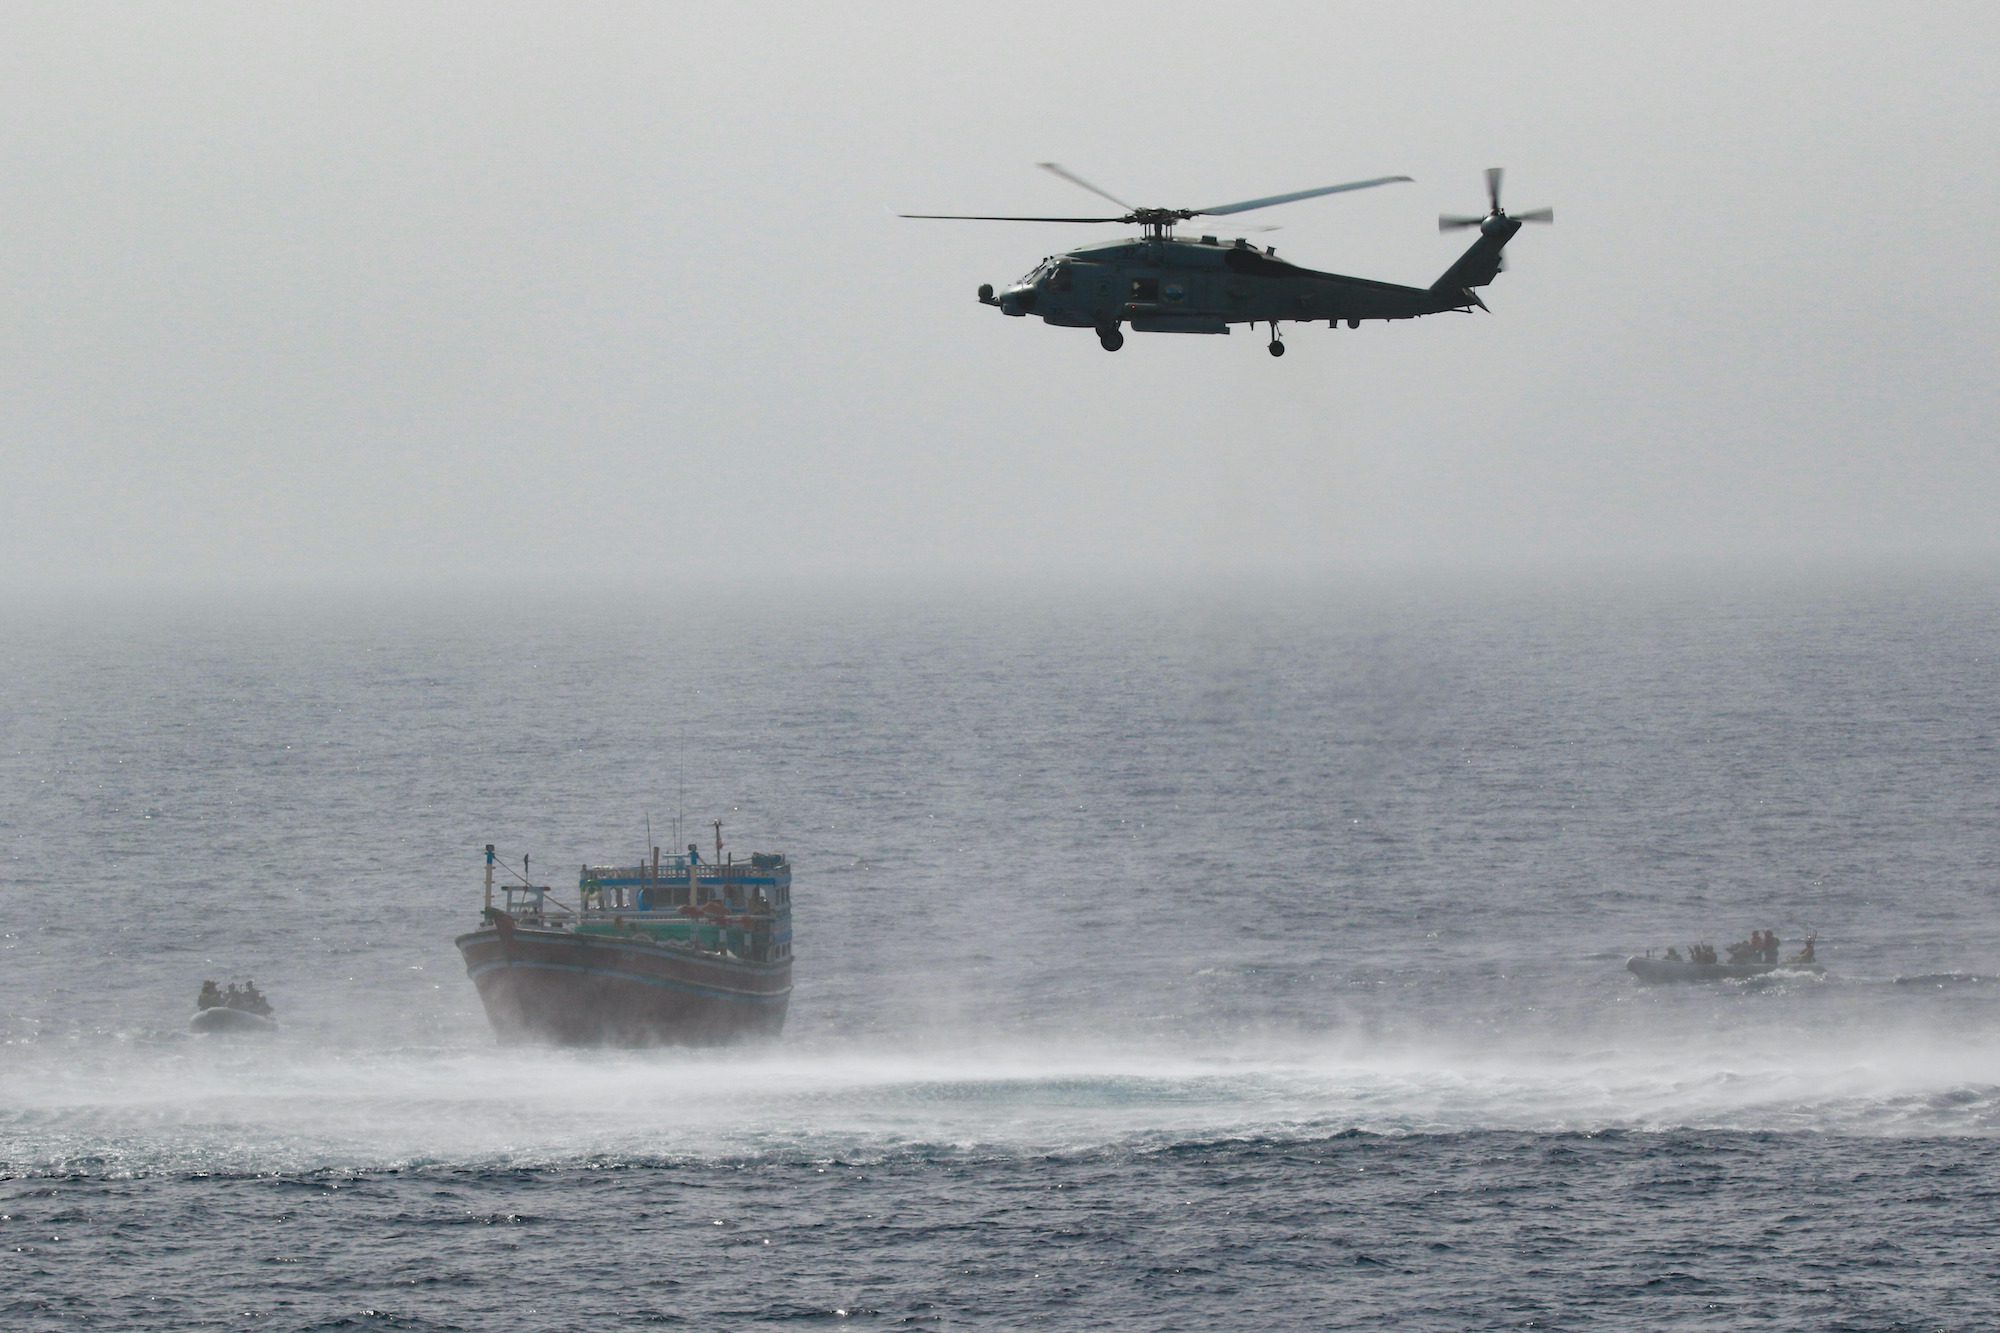 U.S. Navy Offers Cash Reward For Tips On Illegal Maritime Activity And Cargo